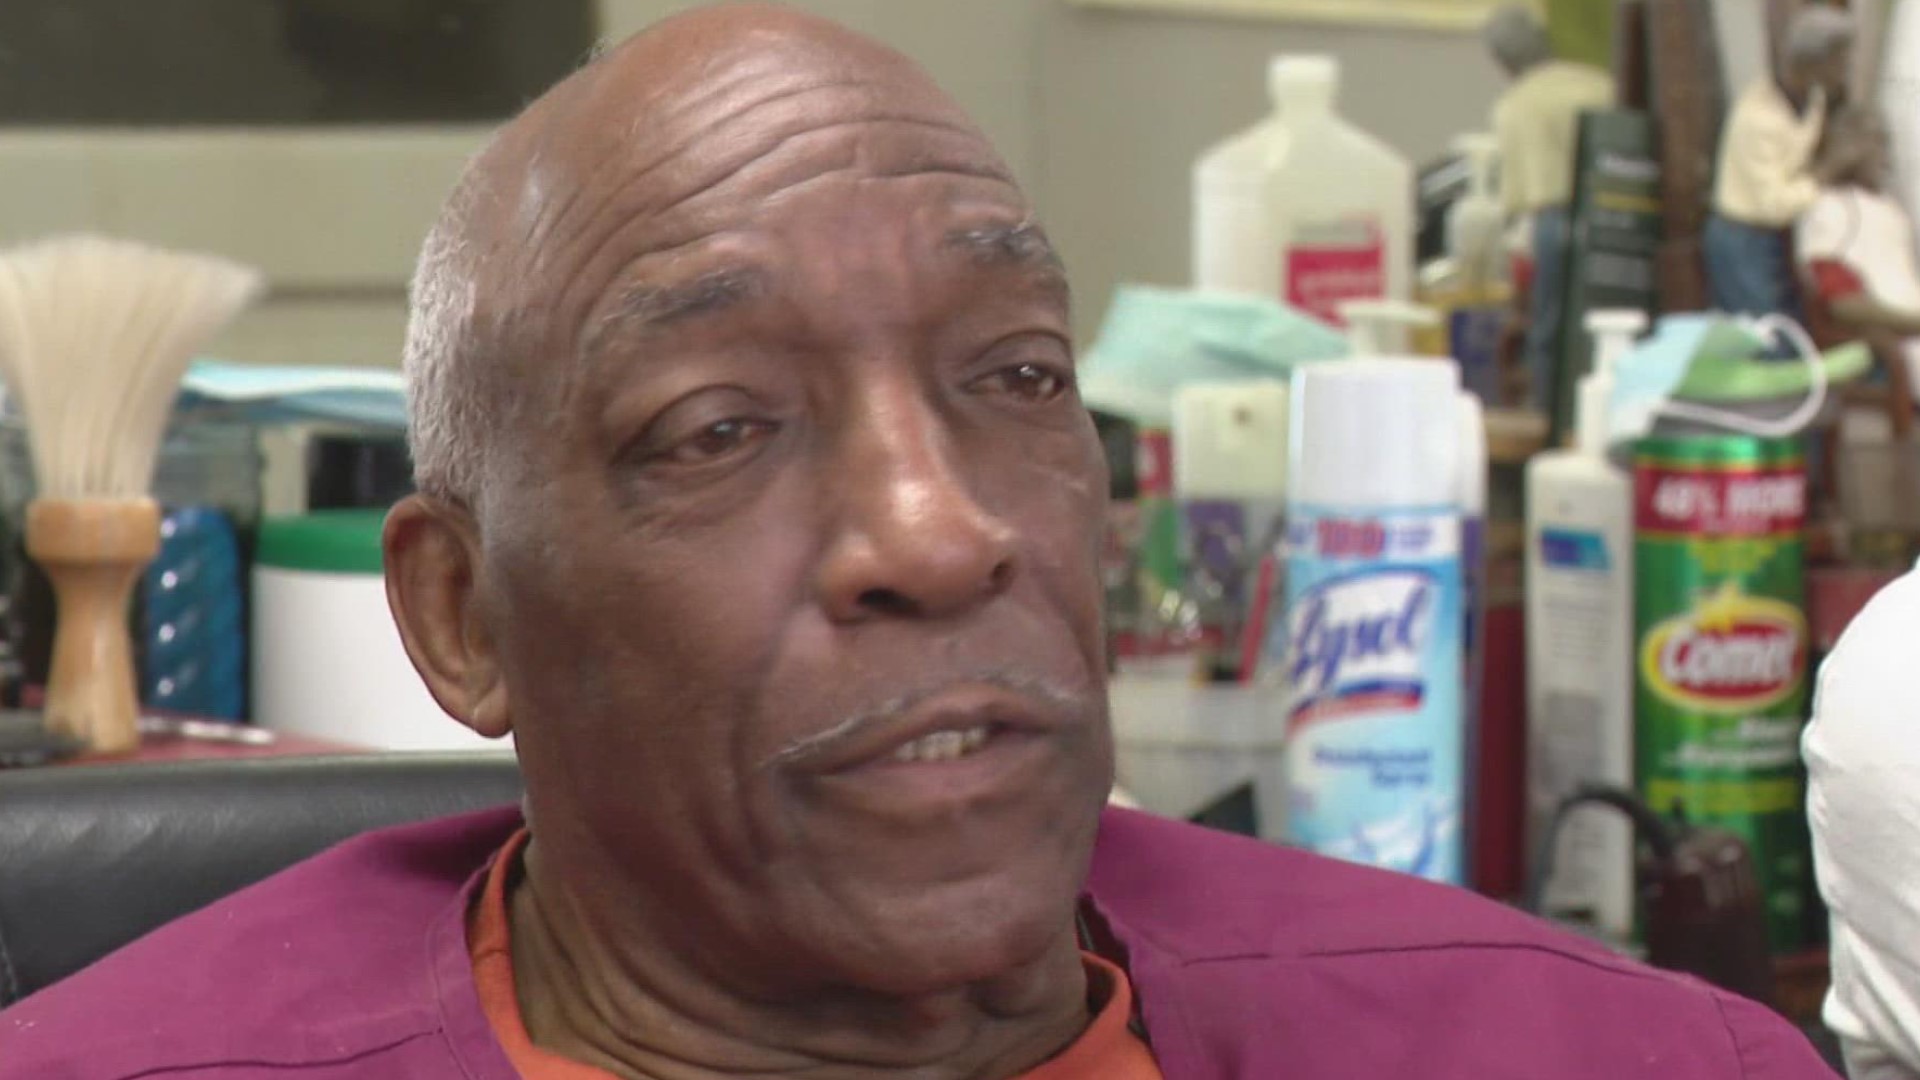 Thomas Carey has been cutting hair for more than 60 years. His Superior Barber shop was targeted for robbery last week.